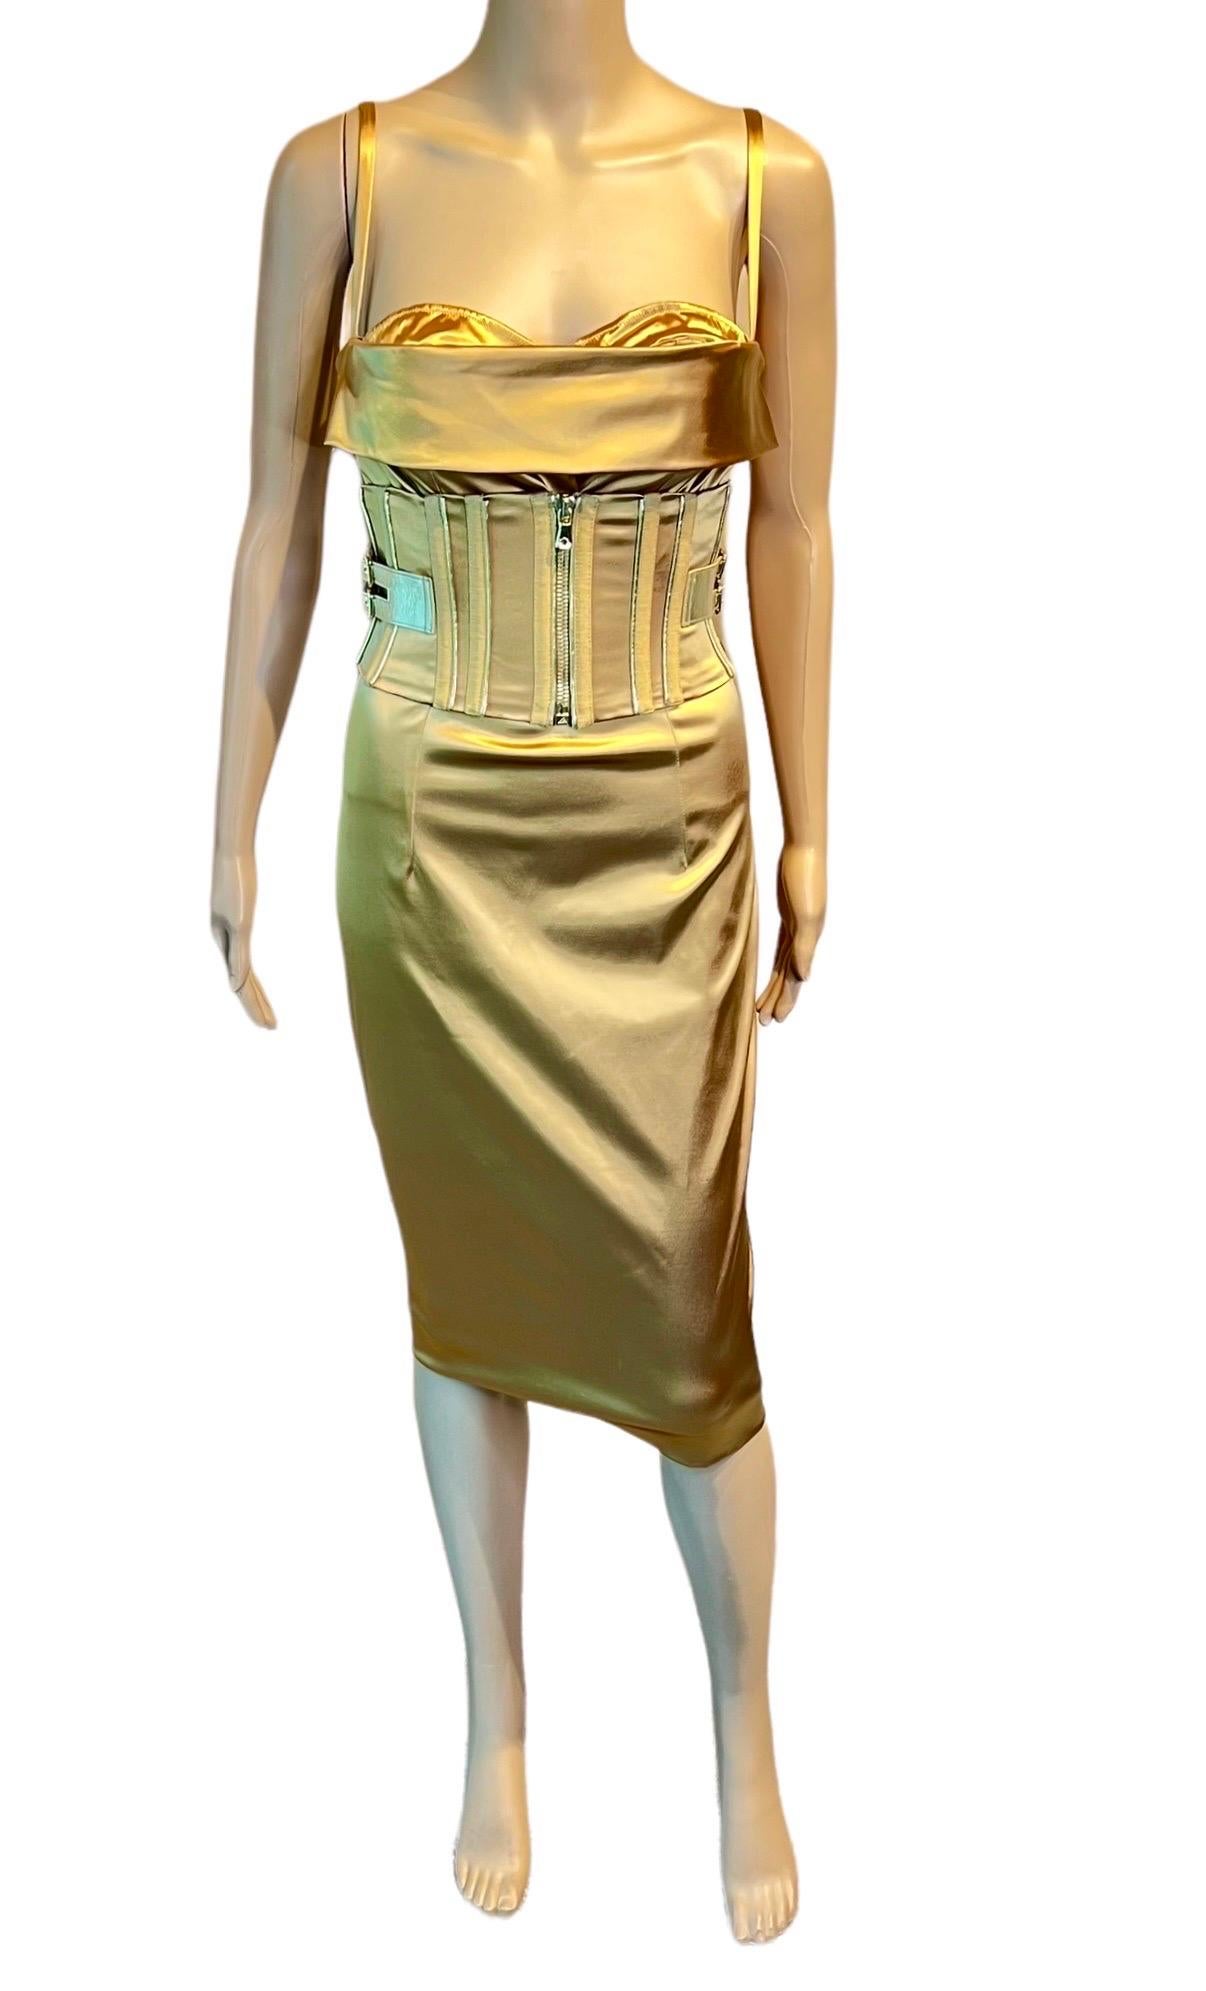 Dolce & Gabbana S/S 2007 Corset Belted Bra Bustier Bodycon Gold Acetate Dress For Sale 2